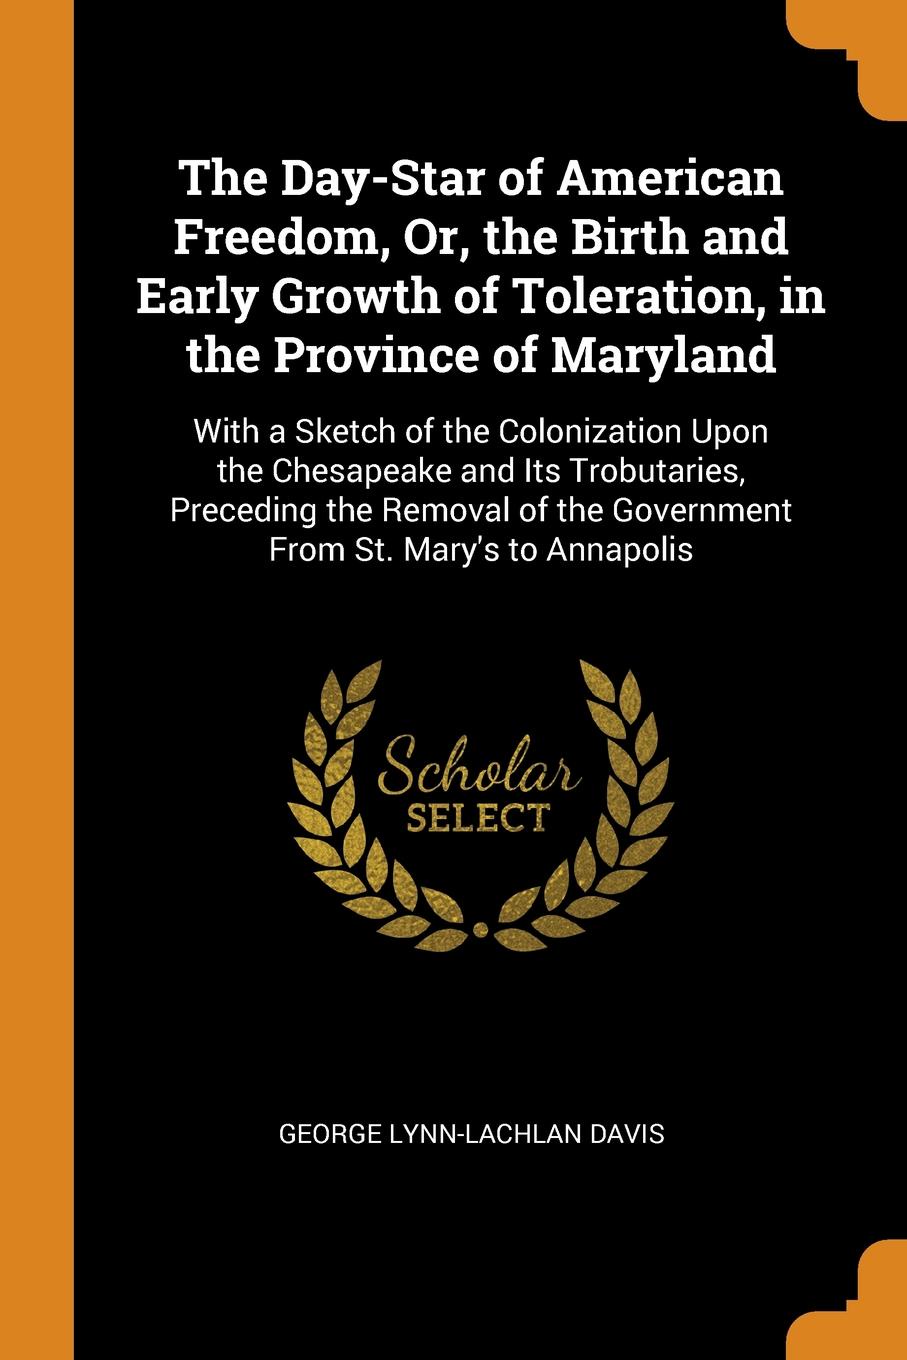 The Day-Star of American Freedom, Or, the Birth and Early Growth of Toleration, in the Province of Maryland. With a Sketch of the Colonization Upon the Chesapeake and Its Trobutaries, Preceding the Removal of the Government From St. Mary`s to Anna...